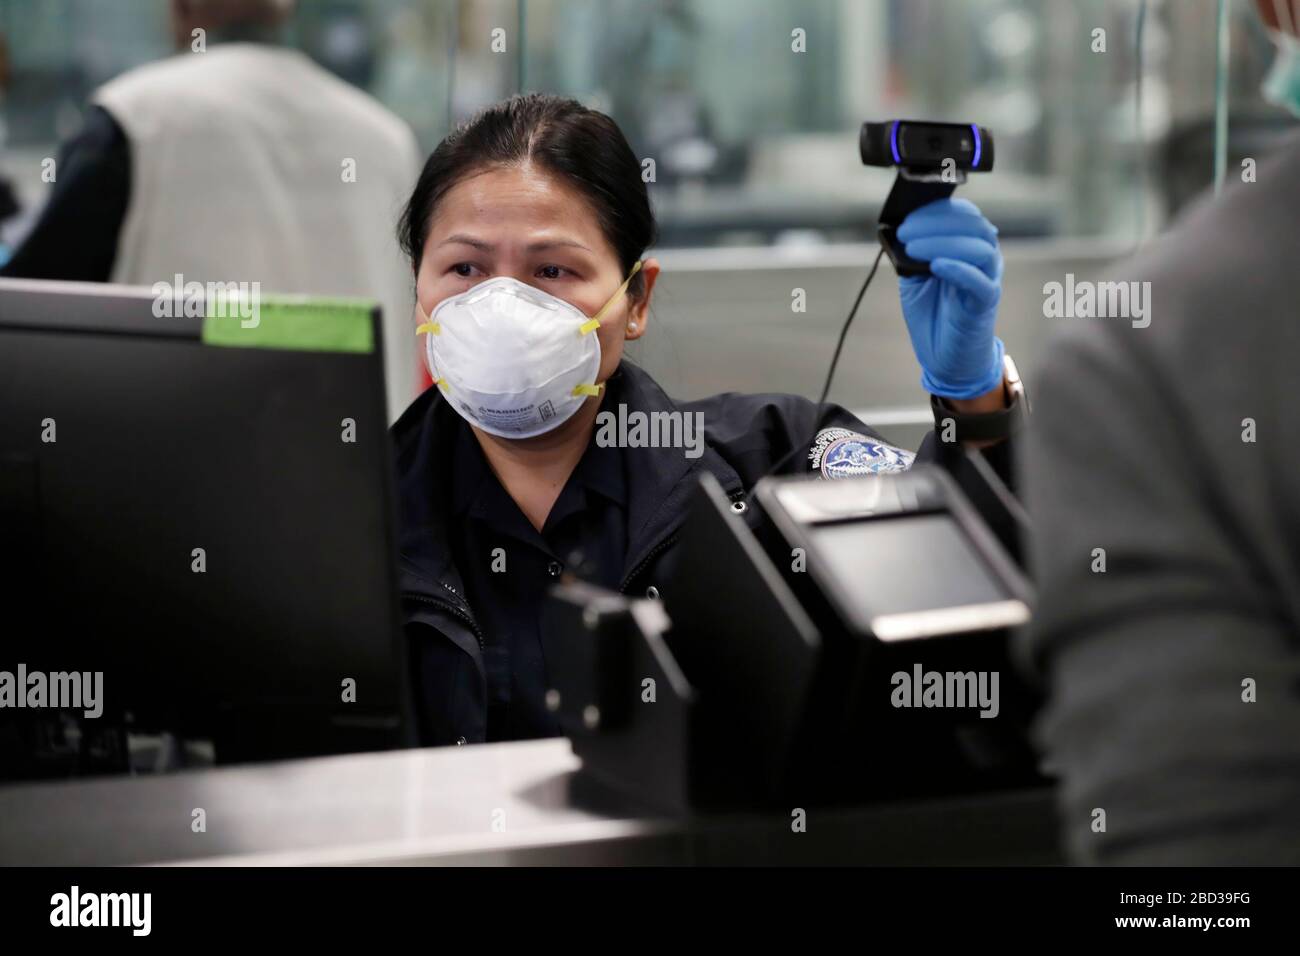 An officer with U.S. Customs and Border Protection Office of Field Operations takes a photo of an arriving international traveler at Dulles International Airport in Dulles, Va., March 18, 2020. In response to the coronavirus pandemic, CBP officers have donned personal protective equipment (PPE) as they work on the frontlines of the crisis. CBP Photo by Glenn Fawcett Stock Photo